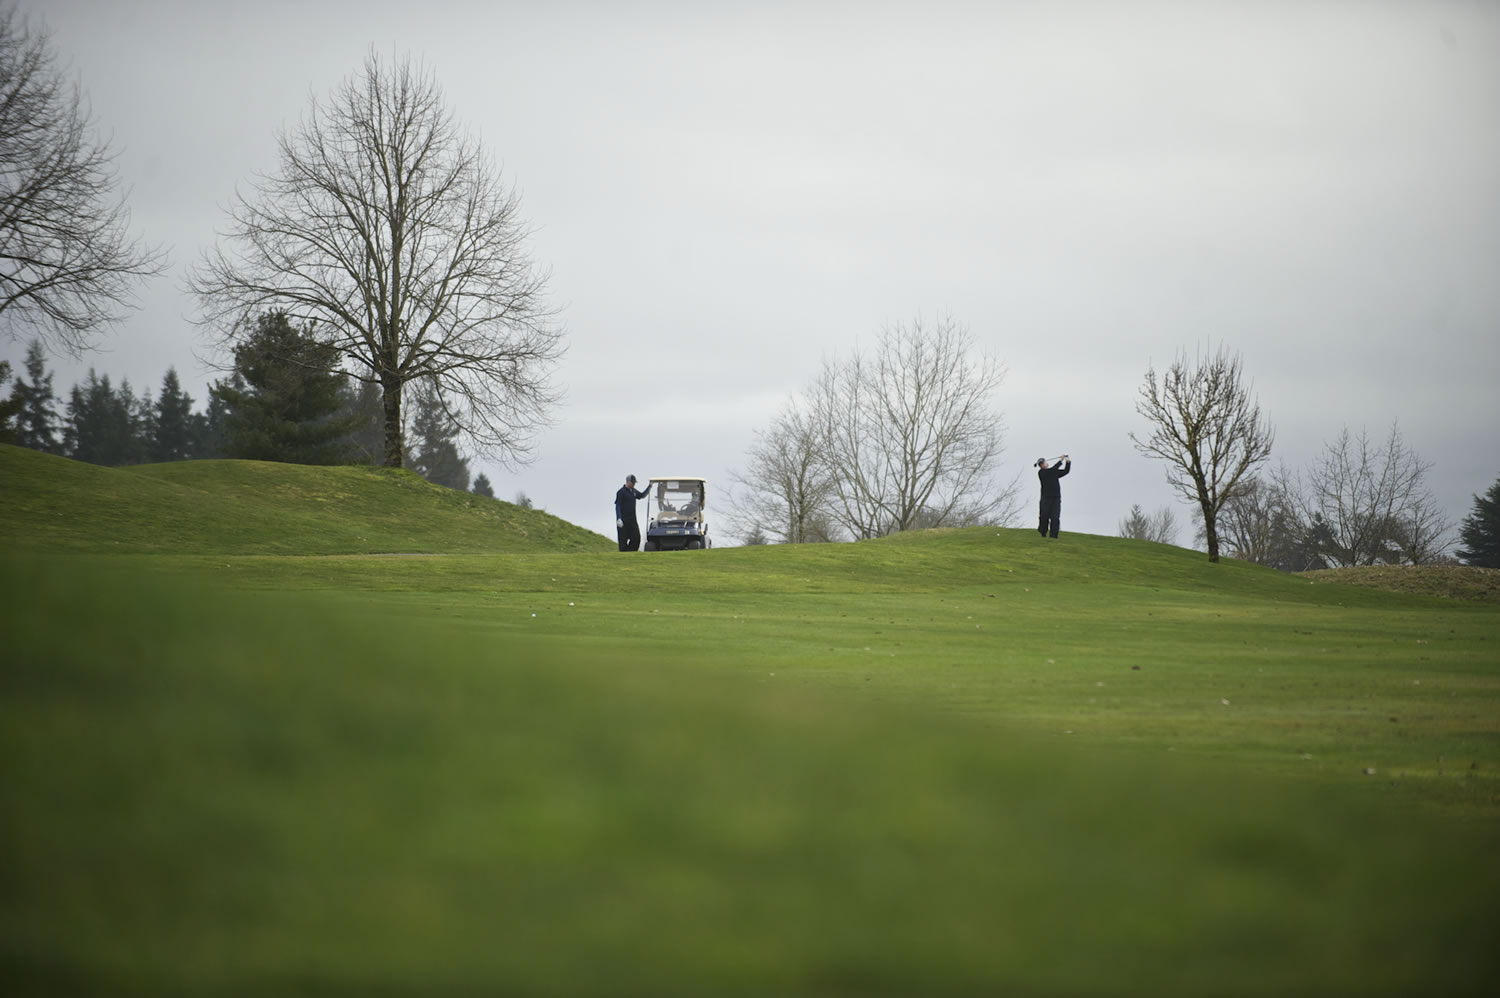 Golfers hit from the fairway on the 18th hole at the Tri-Mountain Golf Course.